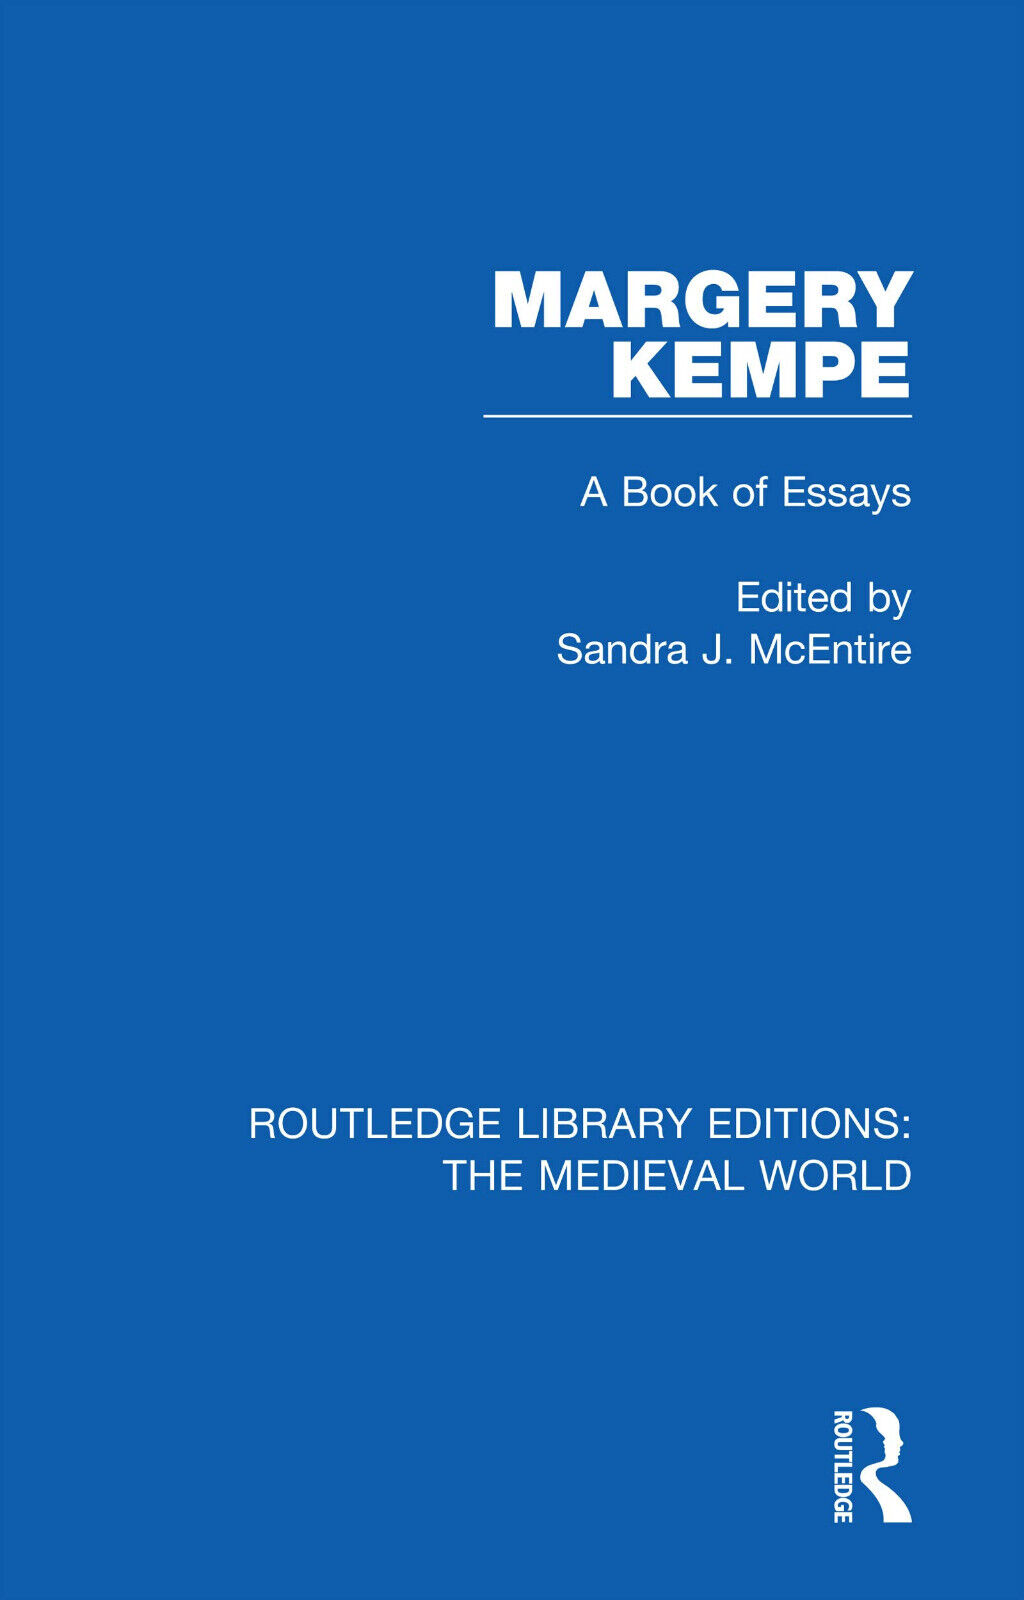 Margery Kempe - Sandra J. McEntire - Routledge, 2020